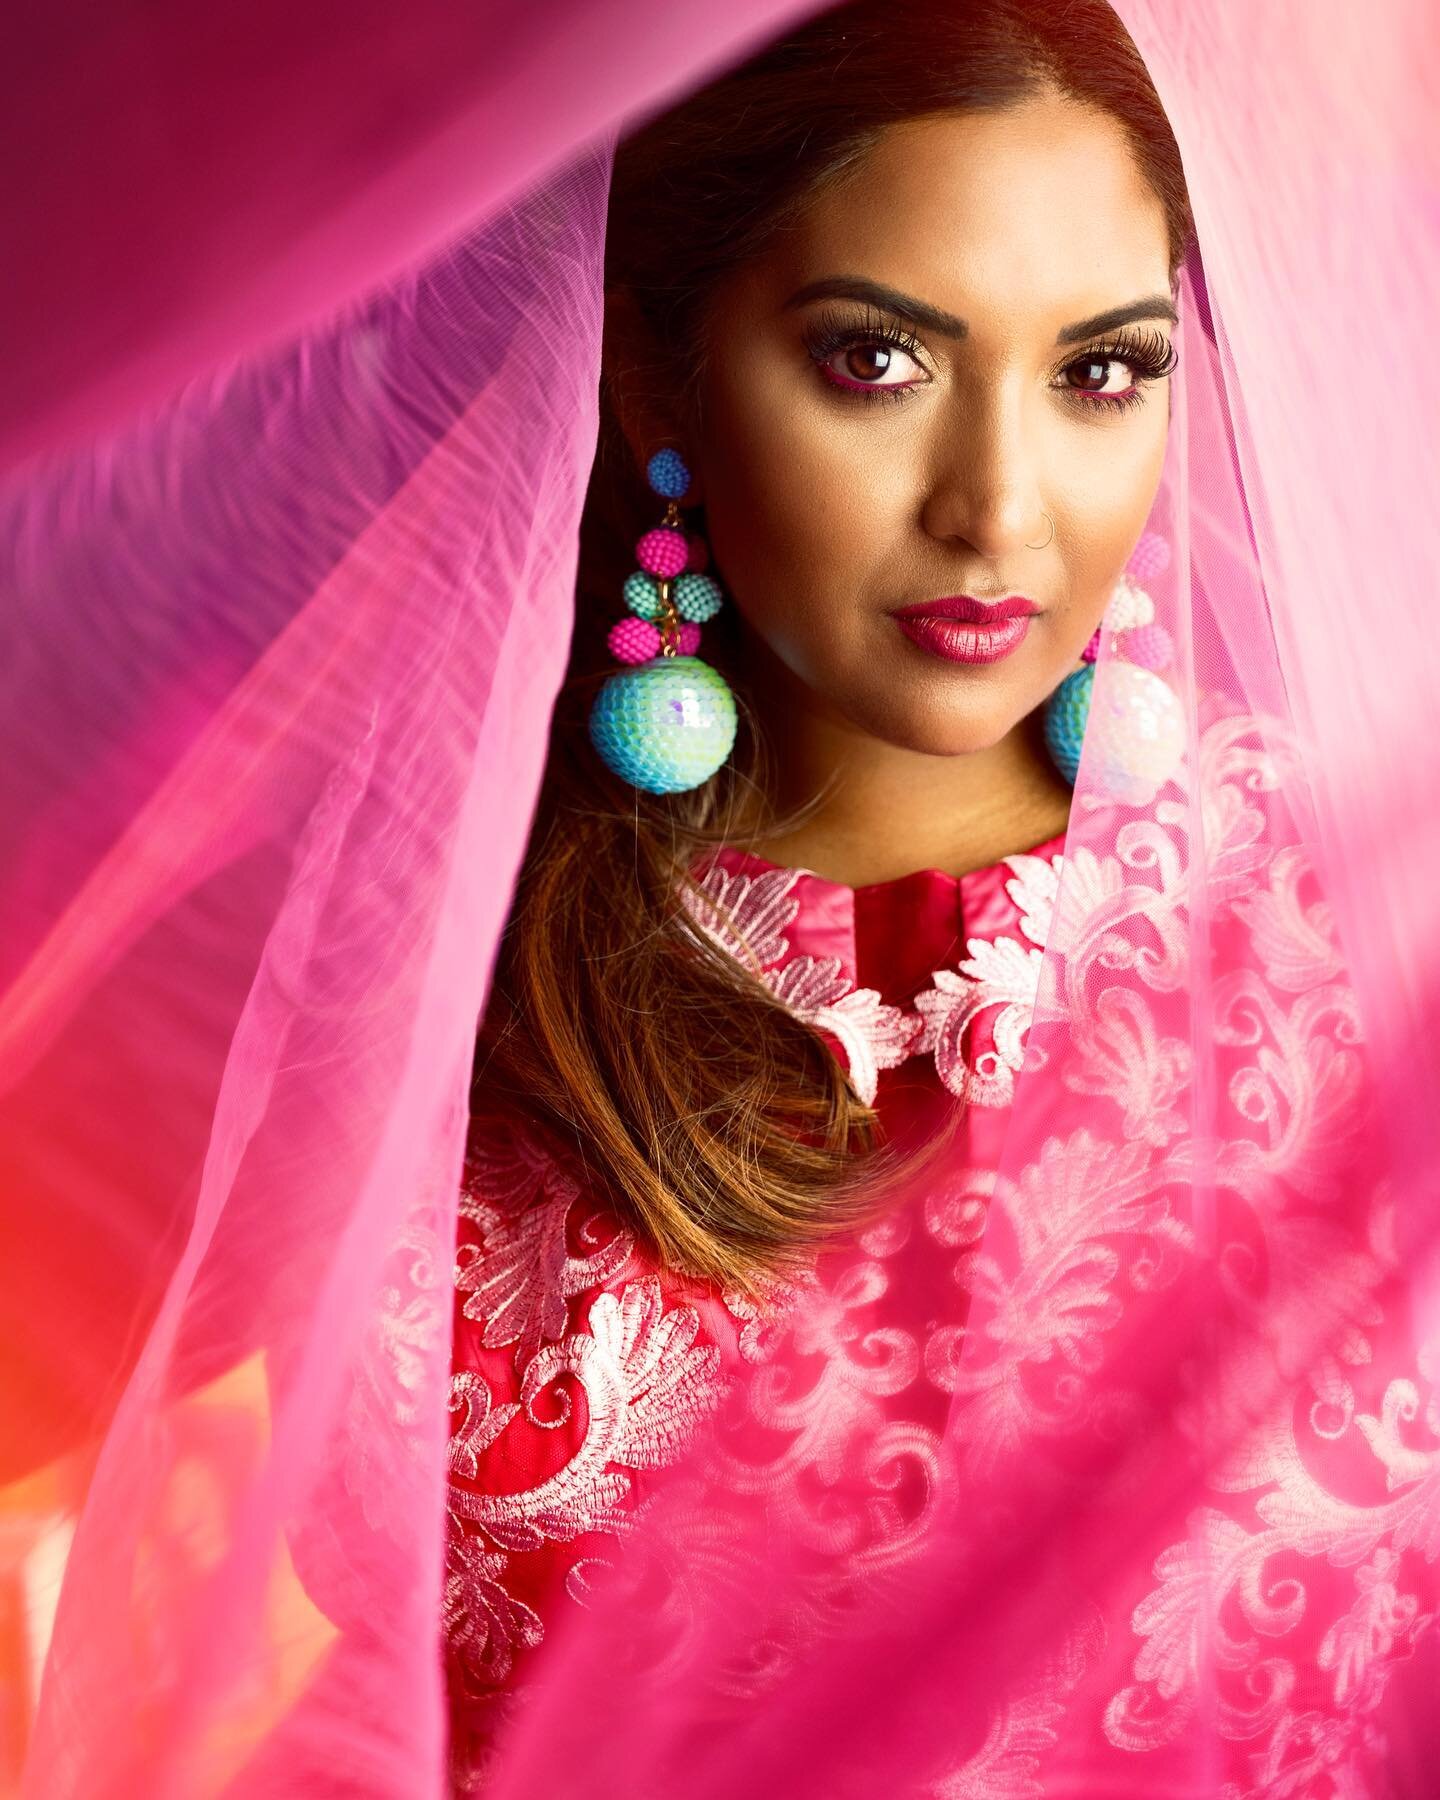 How vibrant is this capture from the latest issue of @thecreativejmichael w/ @jayamcsharma!? We start distributing this week! 

#picoftheday #portraitphotography #pink #magazine #thecreative